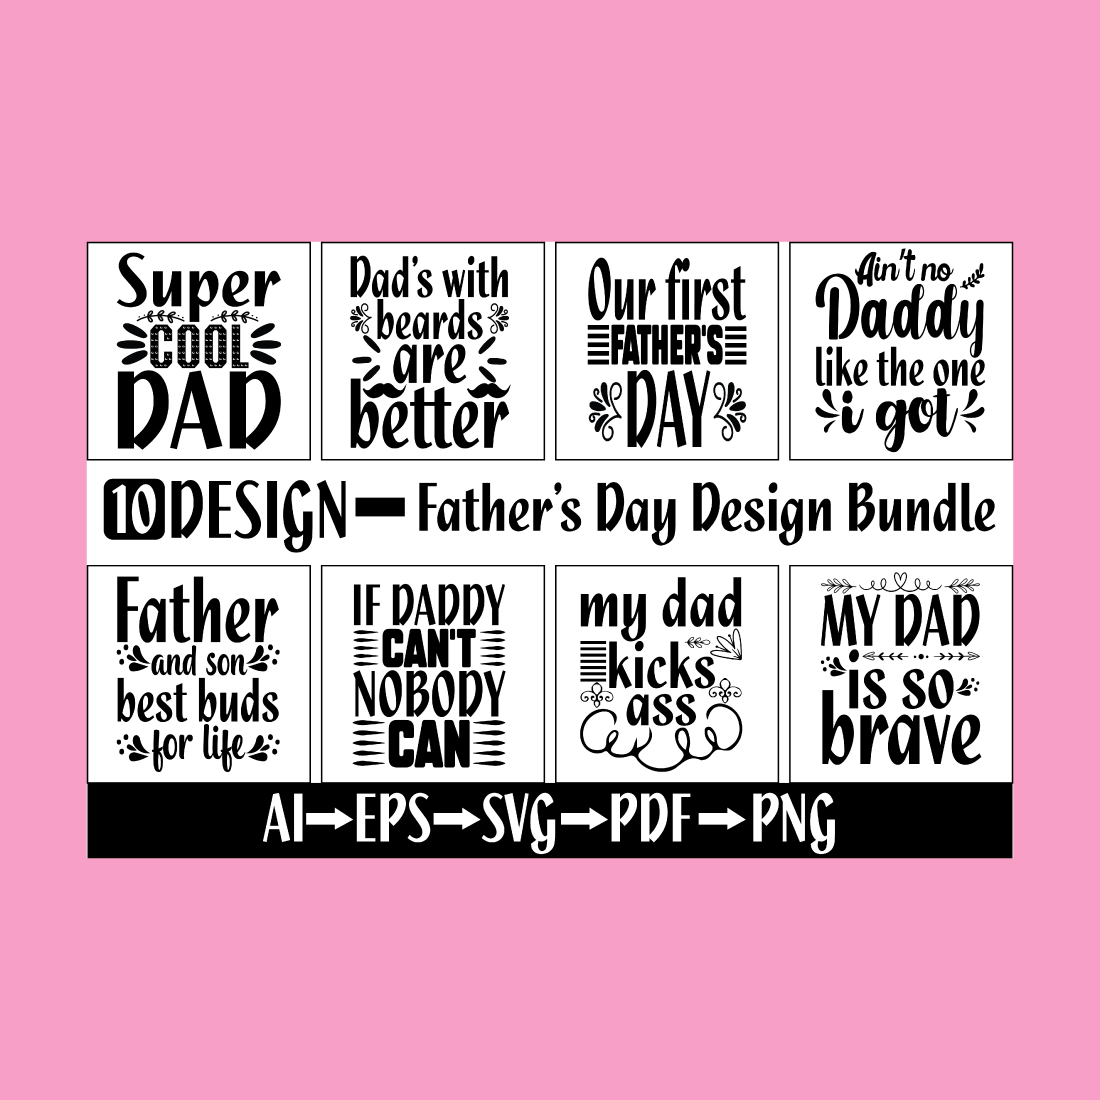 Fathers Day Design Bundle main cover